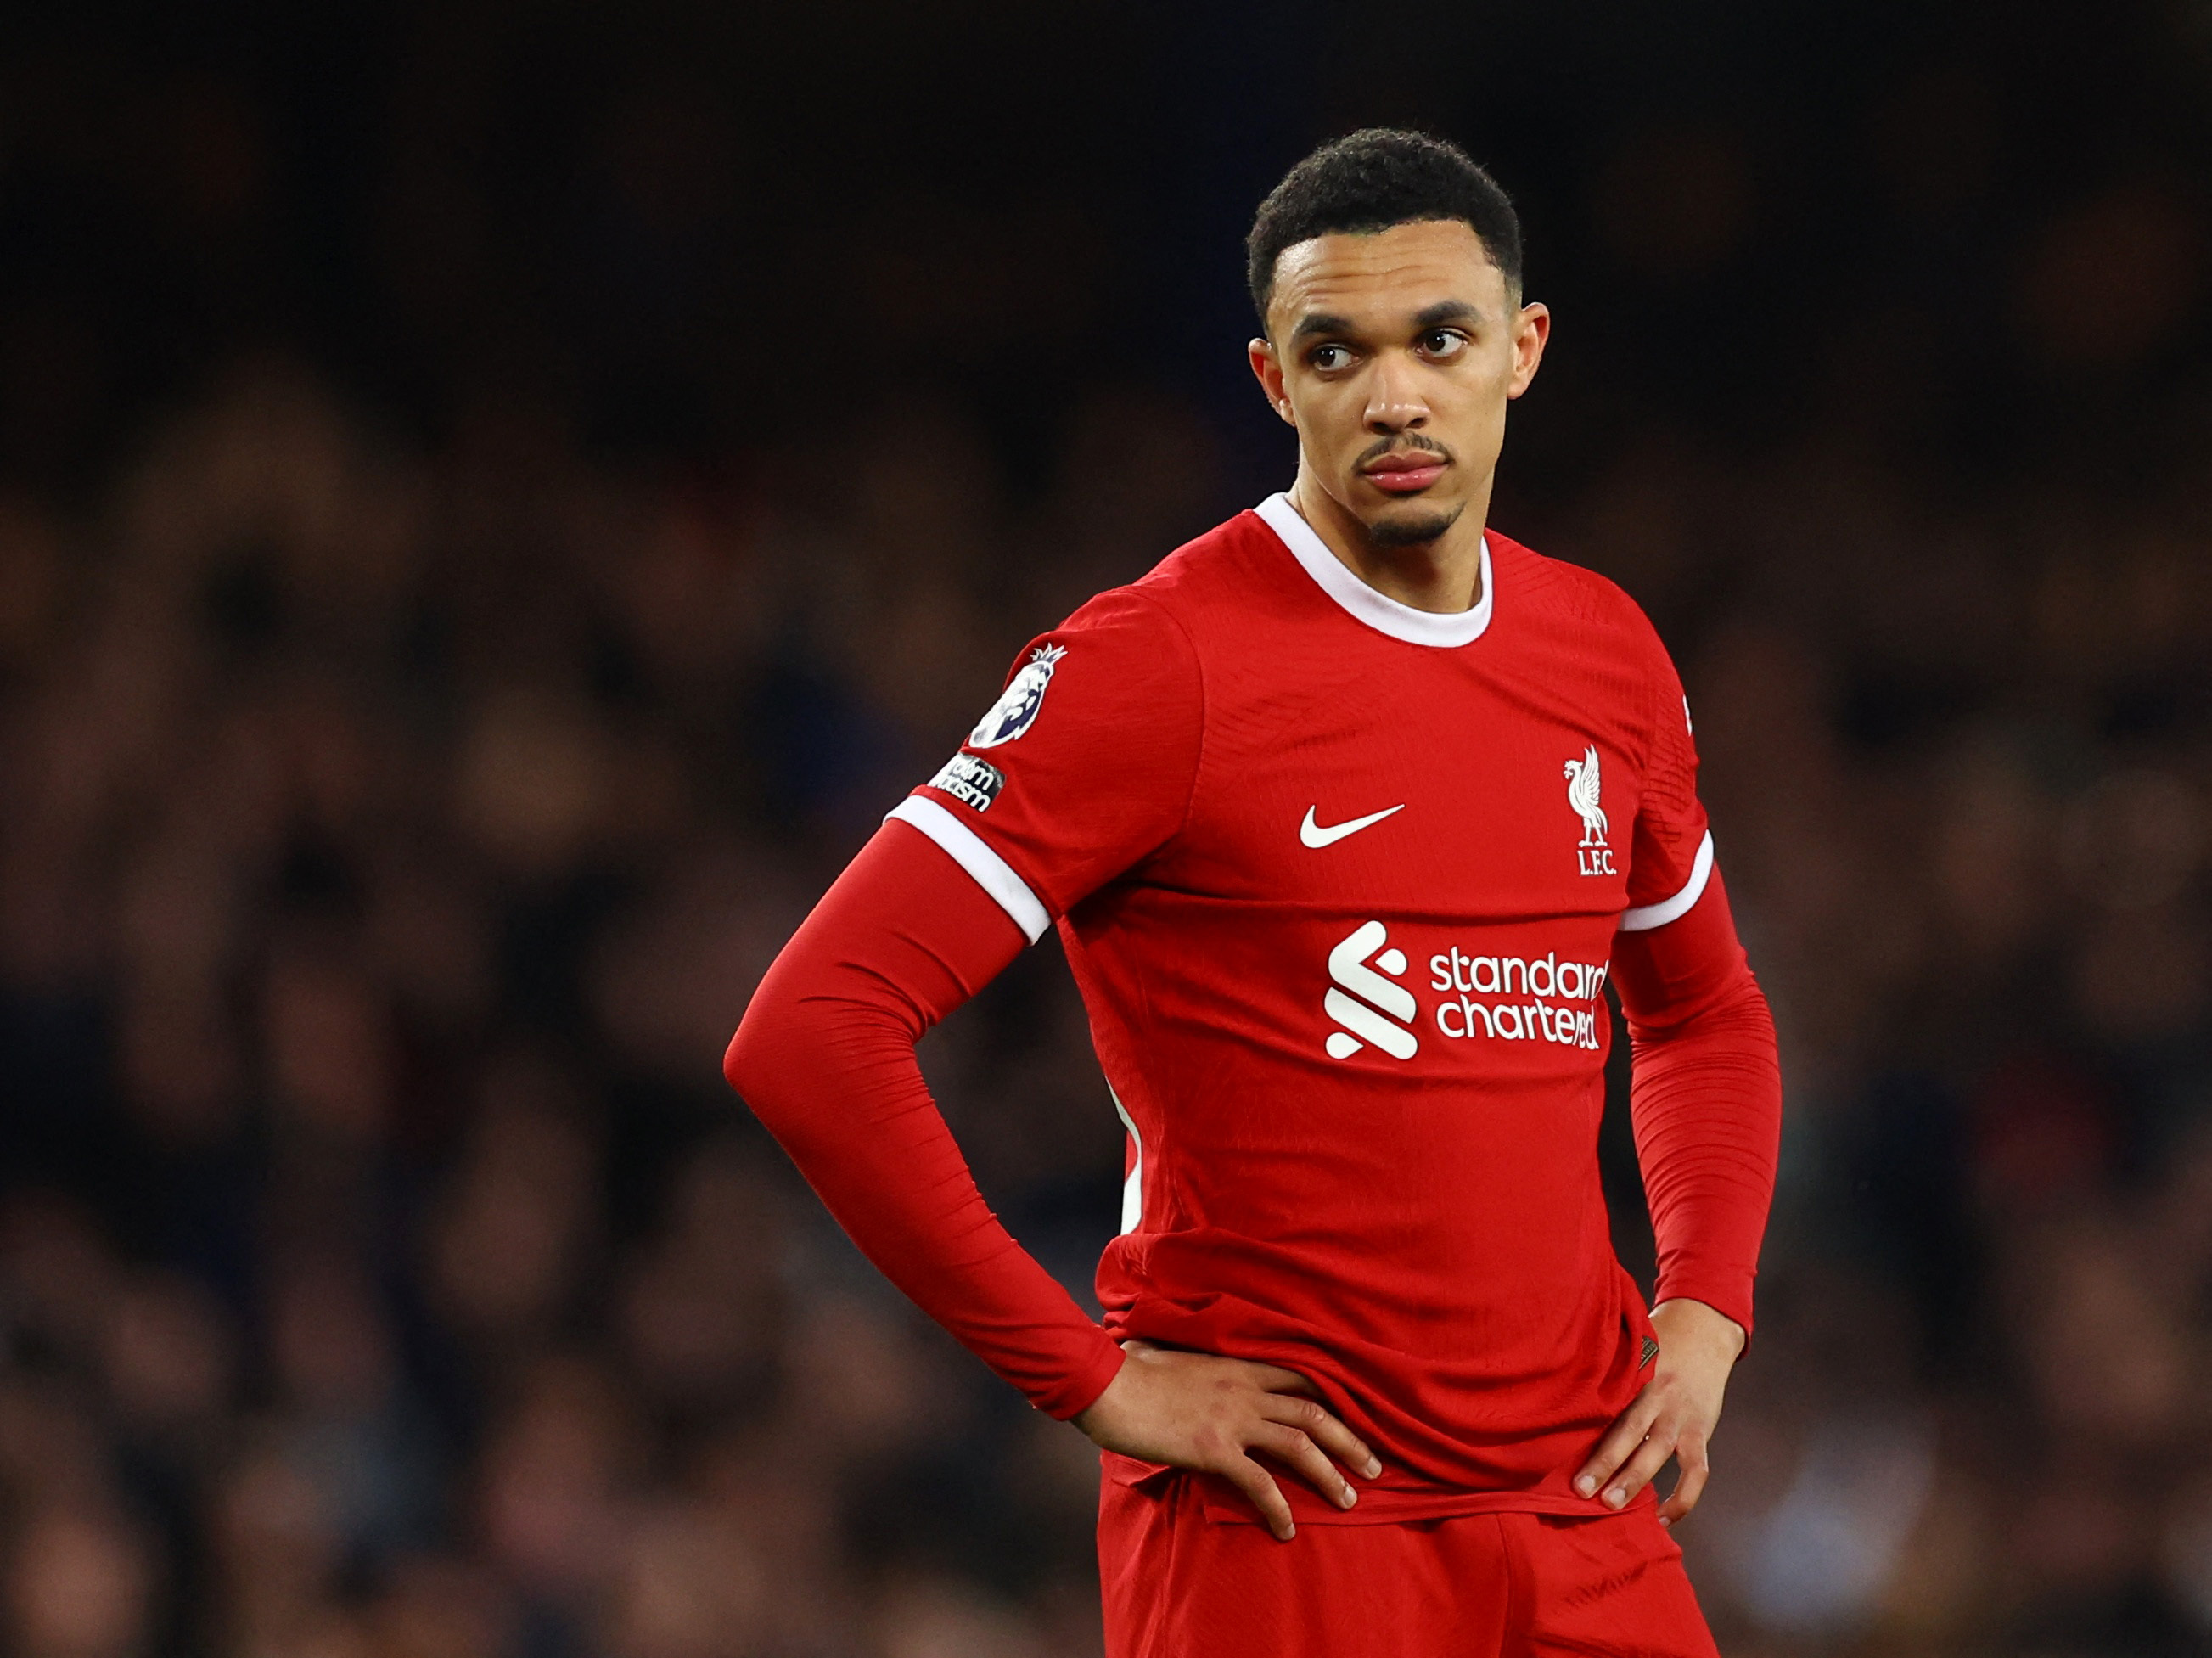 Alexander-Arnold is still chasing the Prem title with Liverpool